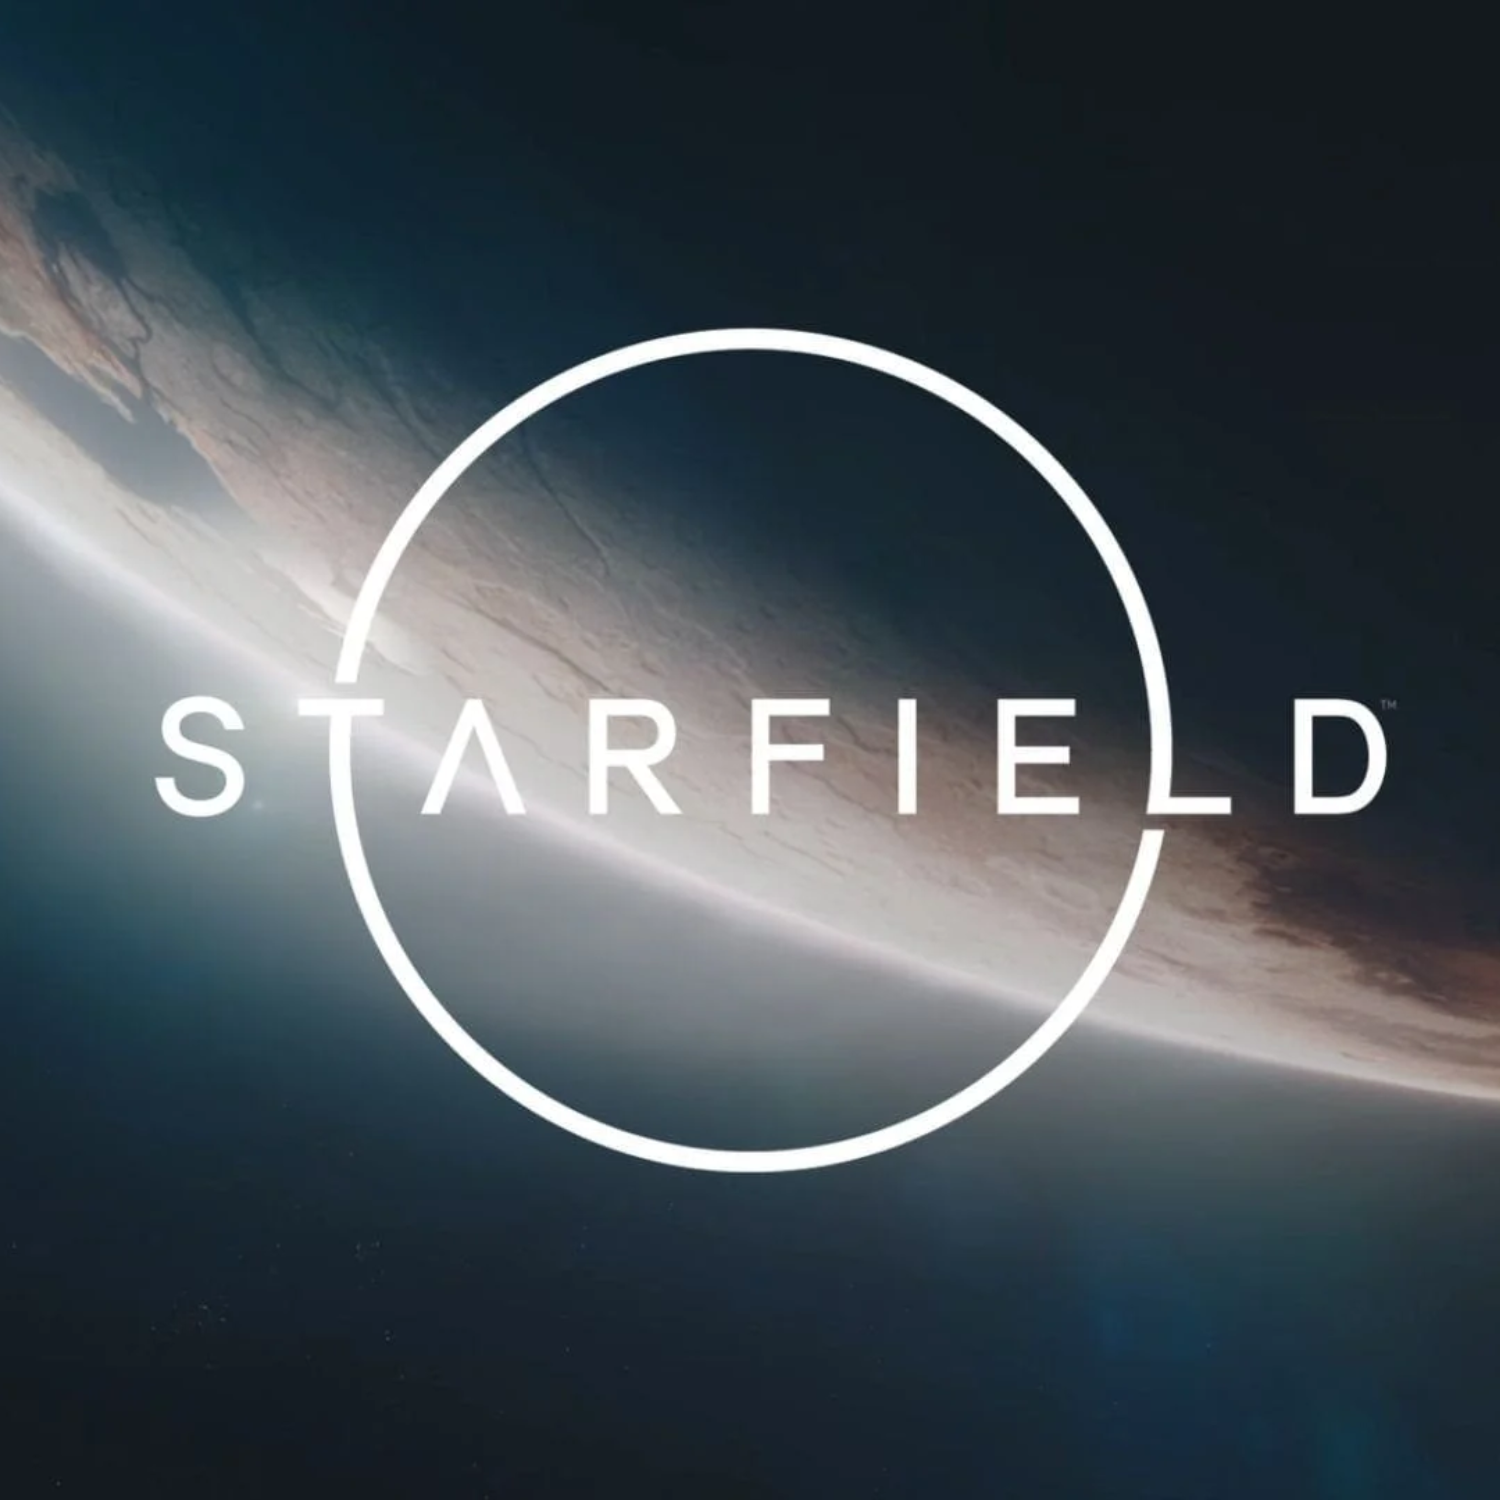 starfield logo in space overlooking a planet